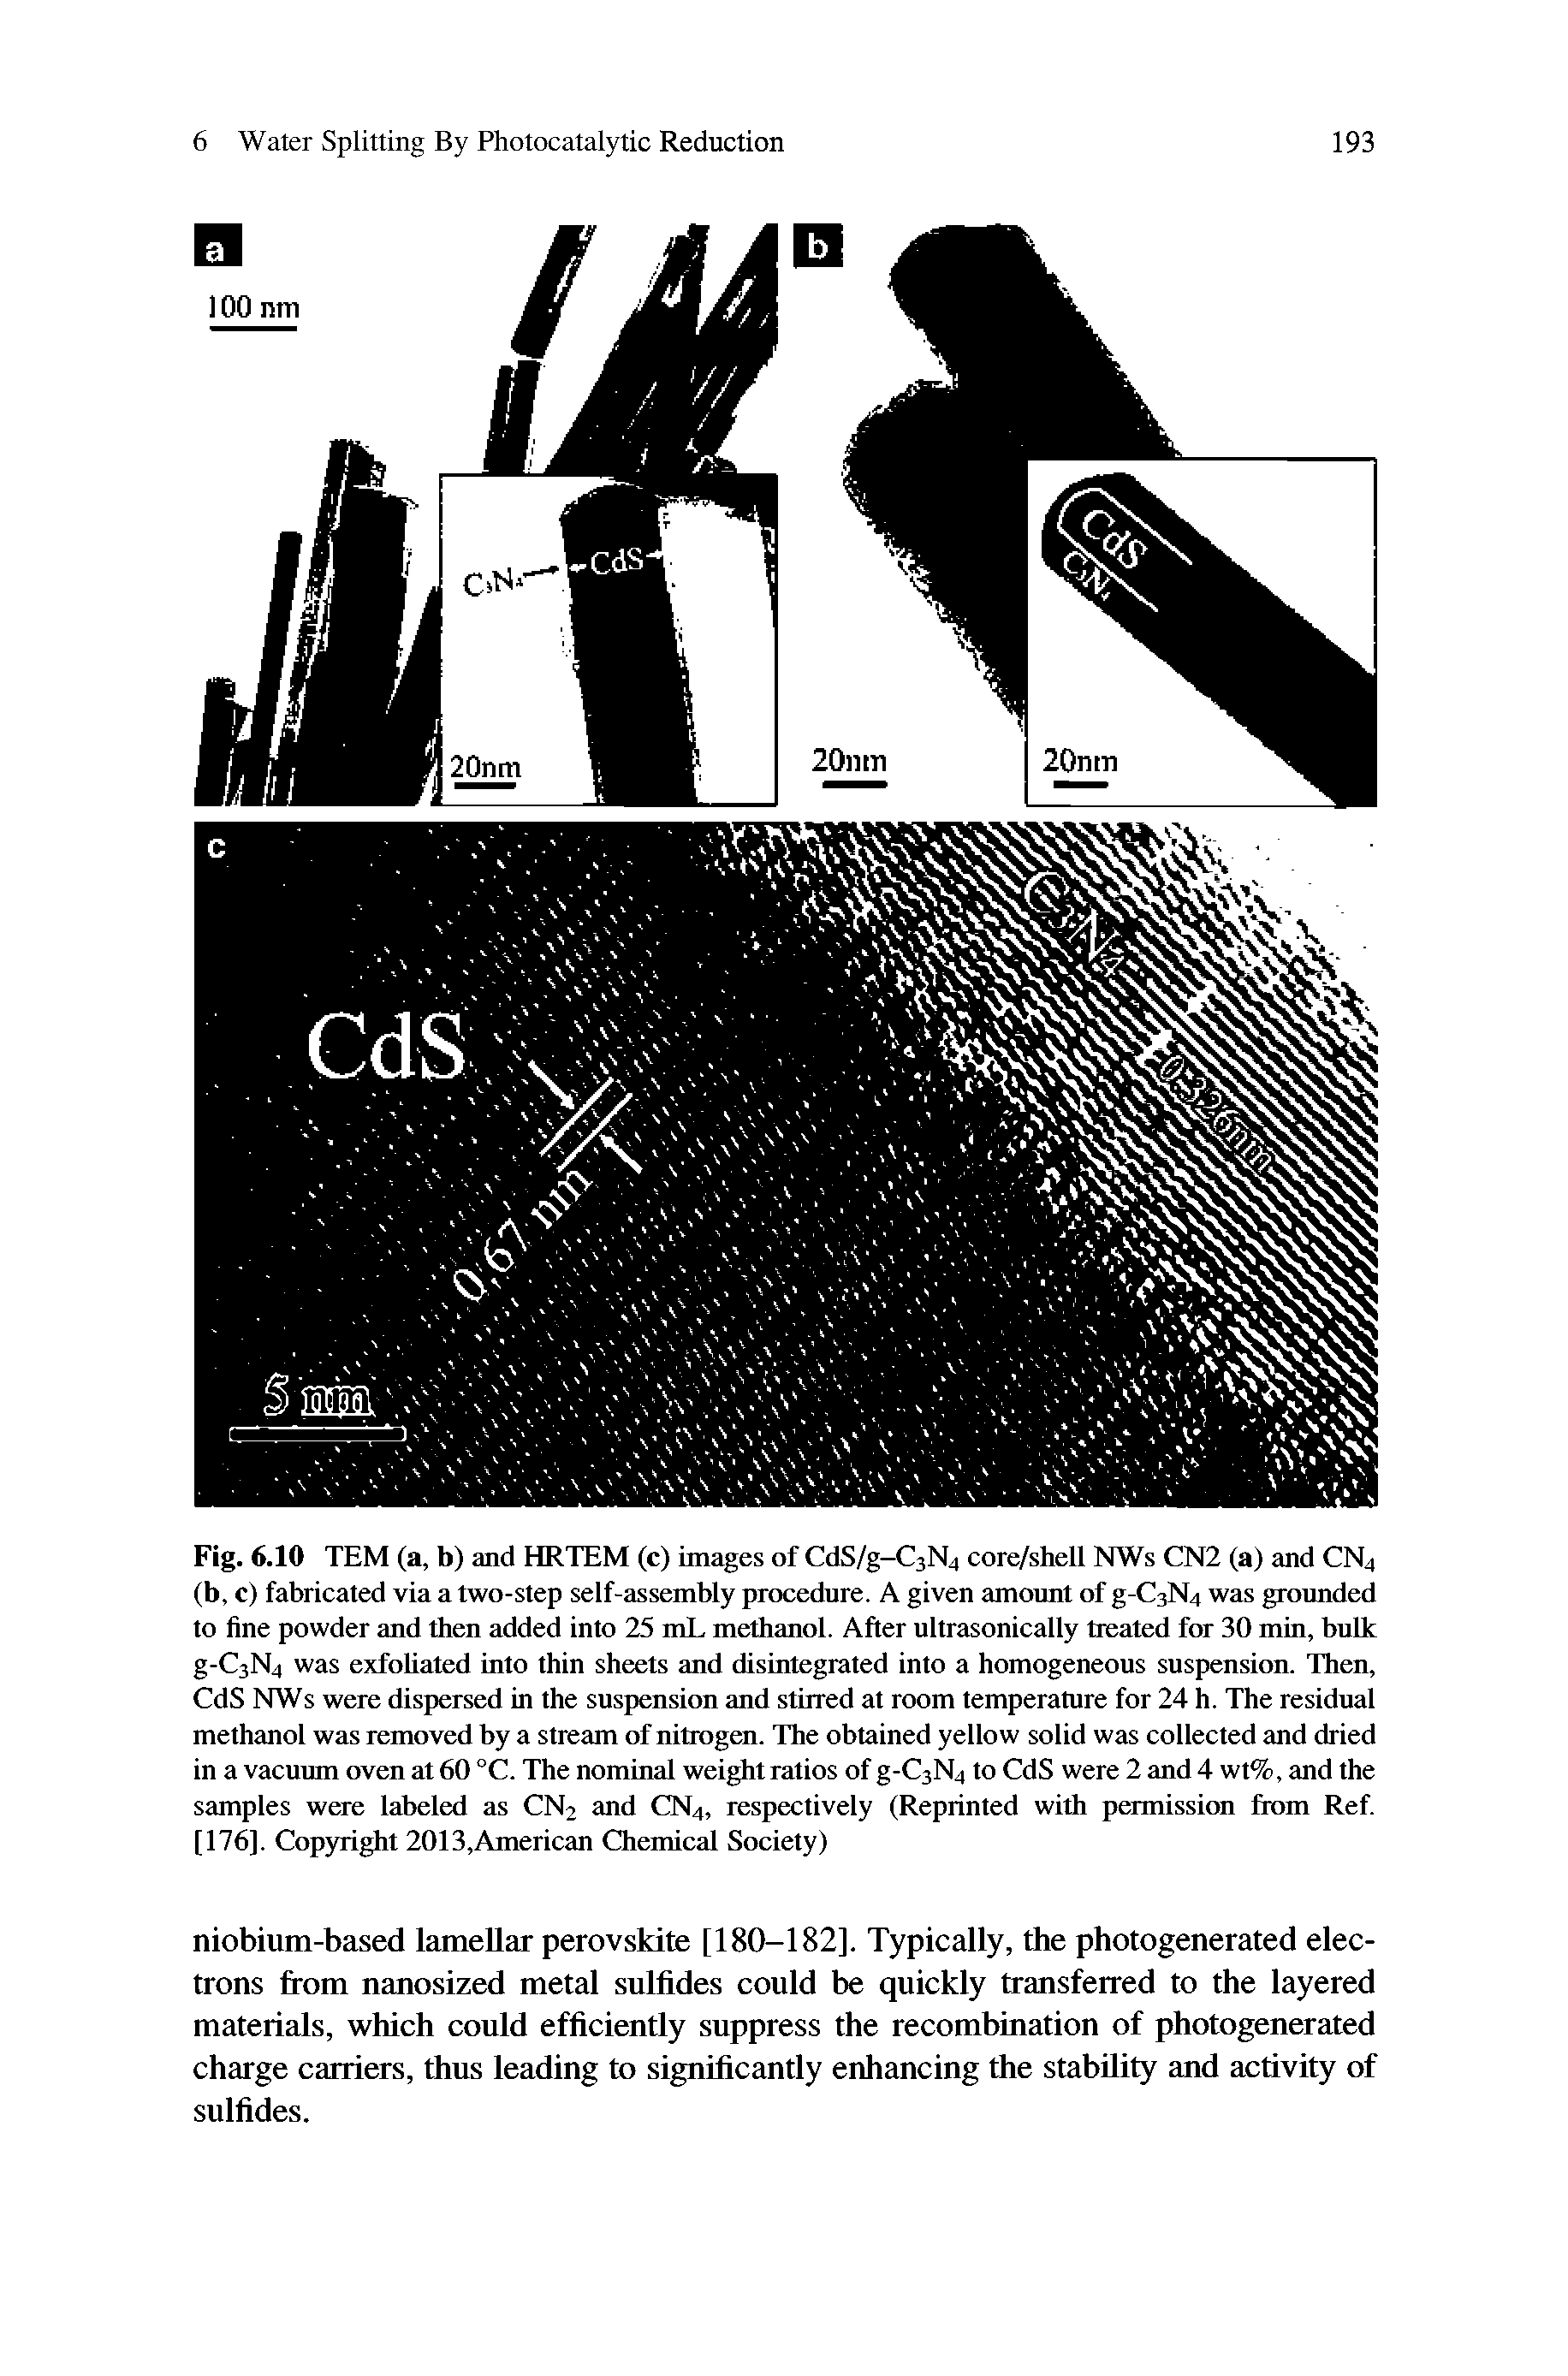 Fig. 6.10 TEM (a, b) and HRTEM (c) images of CdS/g-CaNa core/shell NWs CN2 (a) and CN4 (b, c) fabricated via a two-step self-assembly procedure. A given amount of g-C3N4 was grounded to fine powder and then added into 25 mL methanol. After ultrasonically treated for 30 min, bulk g-C3N4 was exfoliated into thin sheets and disintegrated into a homogeneous suspension. Then, CdS NWs were dispersed in the suspension and stirred at room temperature for 24 h. The residual methanol was removed by a stream of nitrogen. The obtained yellow solid was collected and dried in a vacuum oven at 60 °C. The nominal weight ratios of g-C3N4 to CdS were 2 and 4 wt%, and the samples were labeled as CN2 and CN4, respectively (Reprinted with permission from Ref [176]. Copyright 2013,American Chemical Society)...